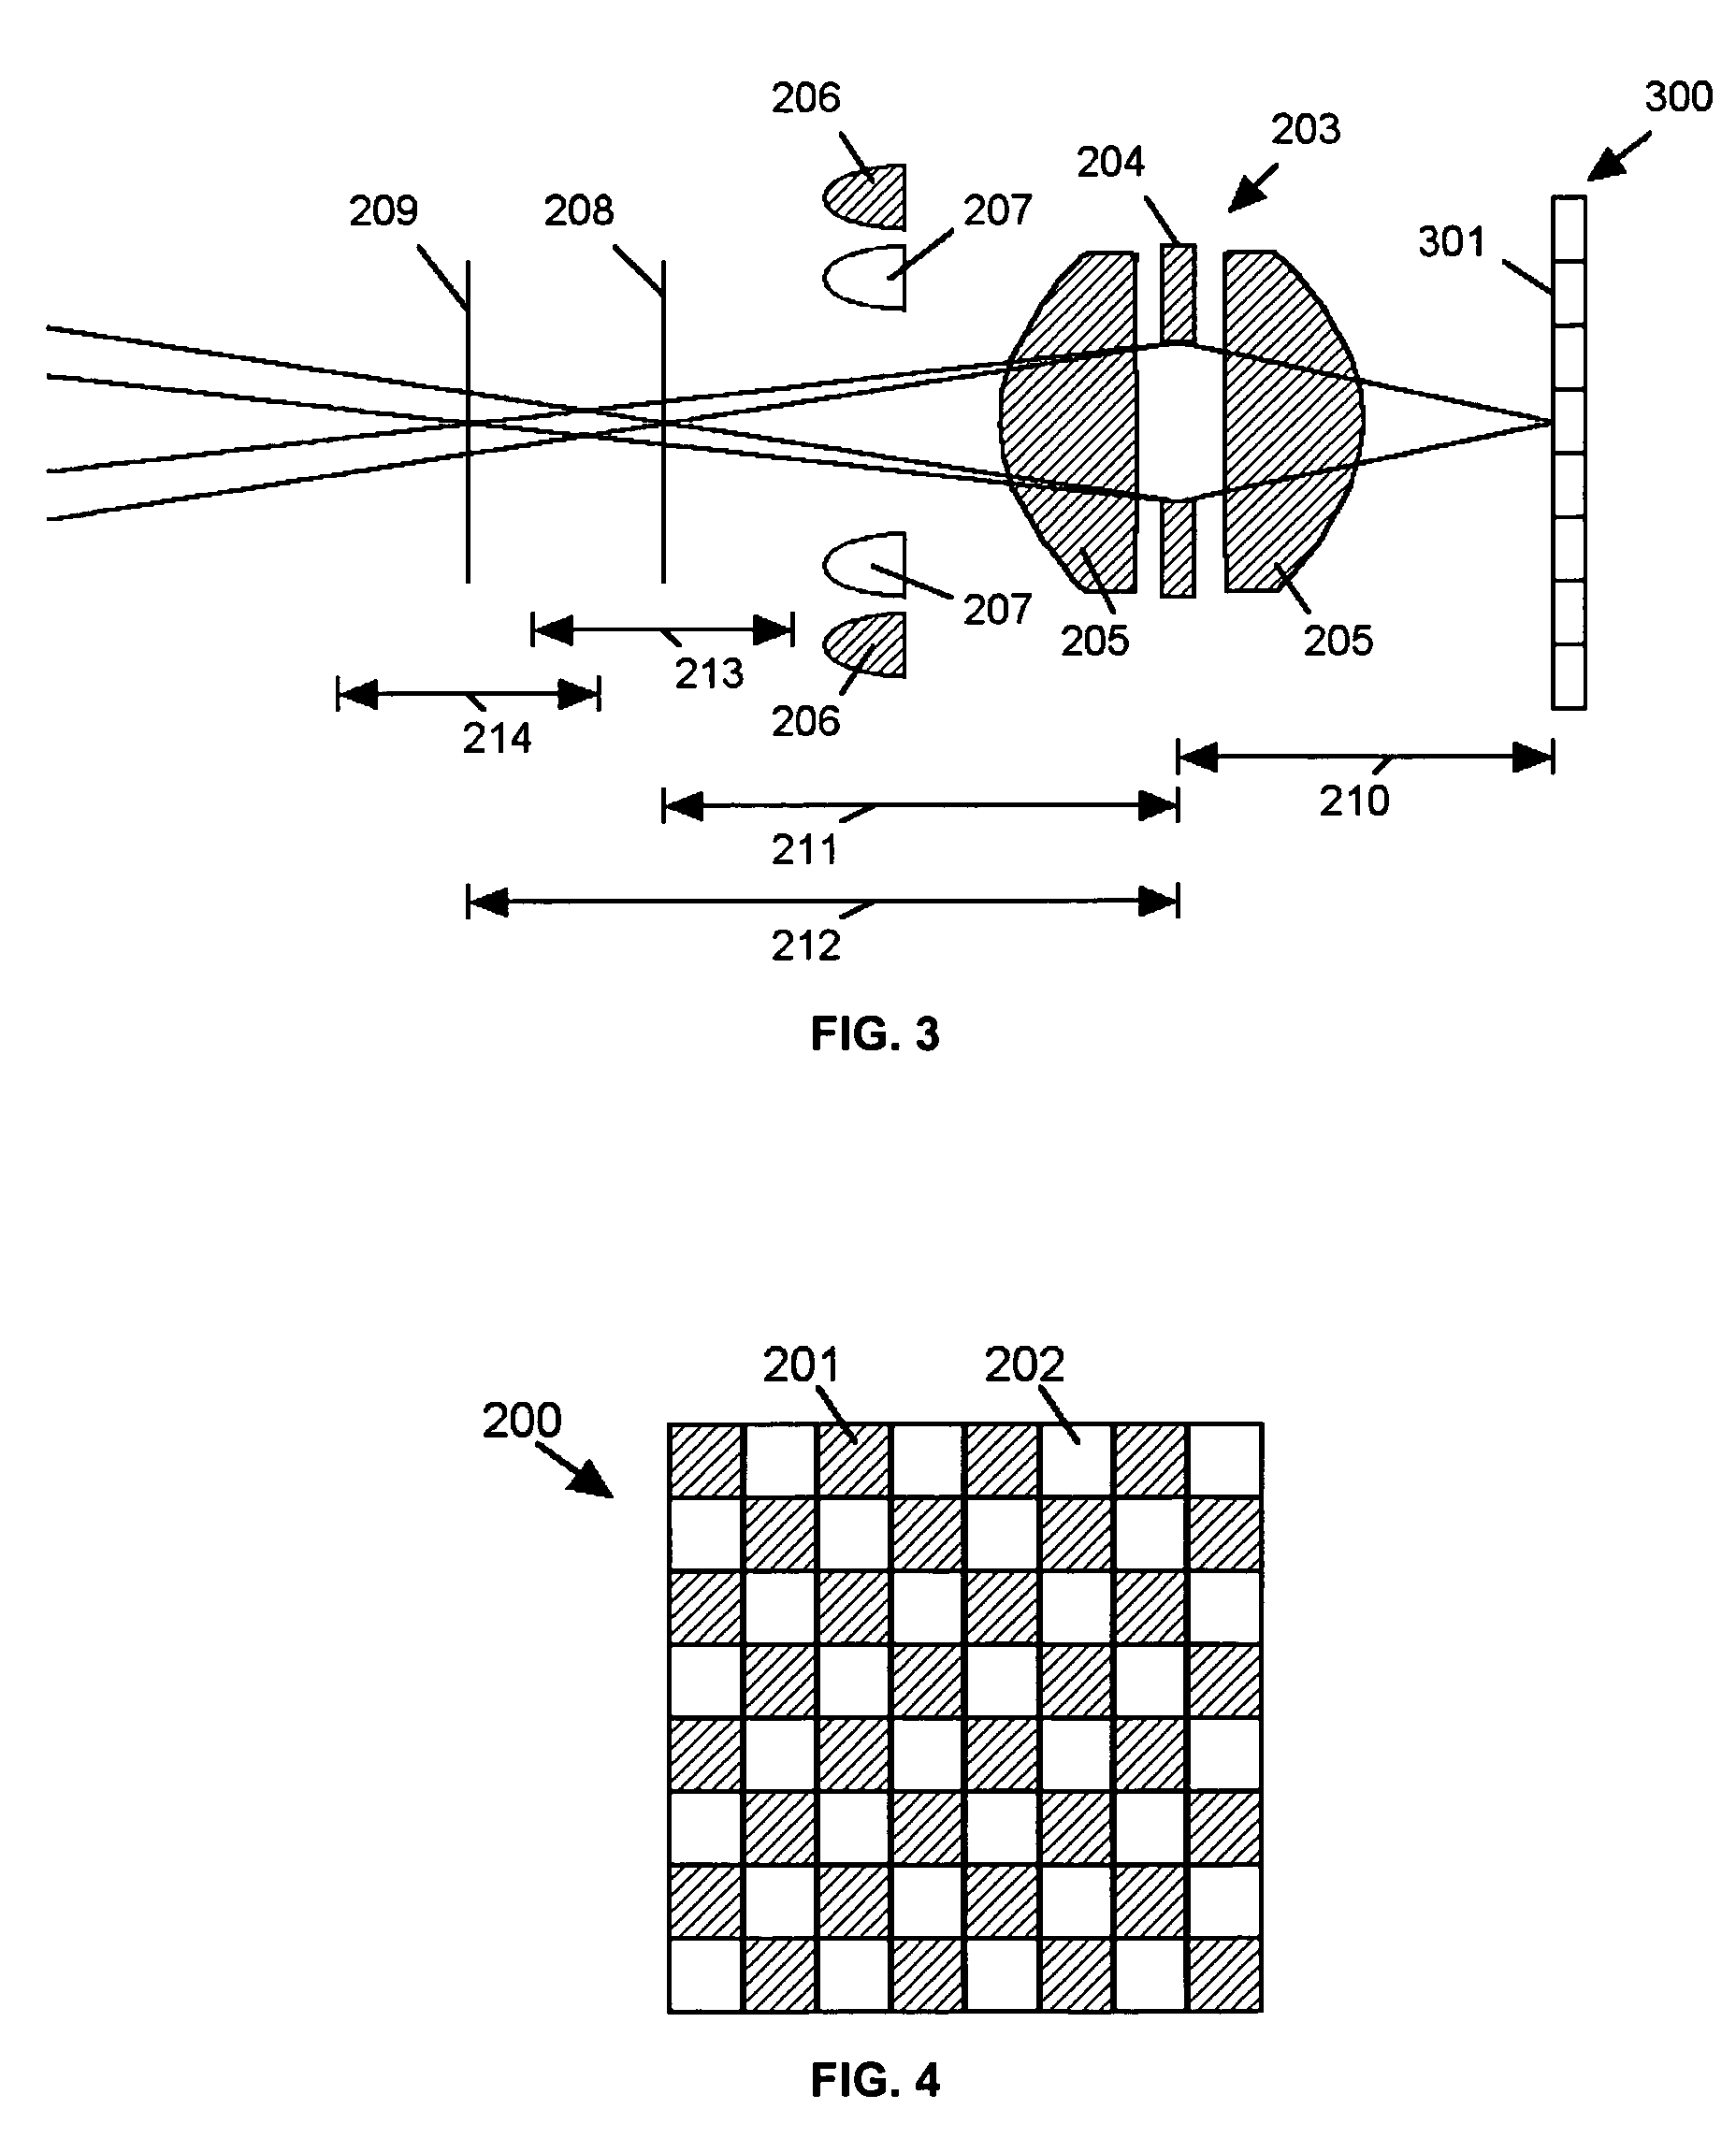 Extended depth of field imaging system using chromatic aberration